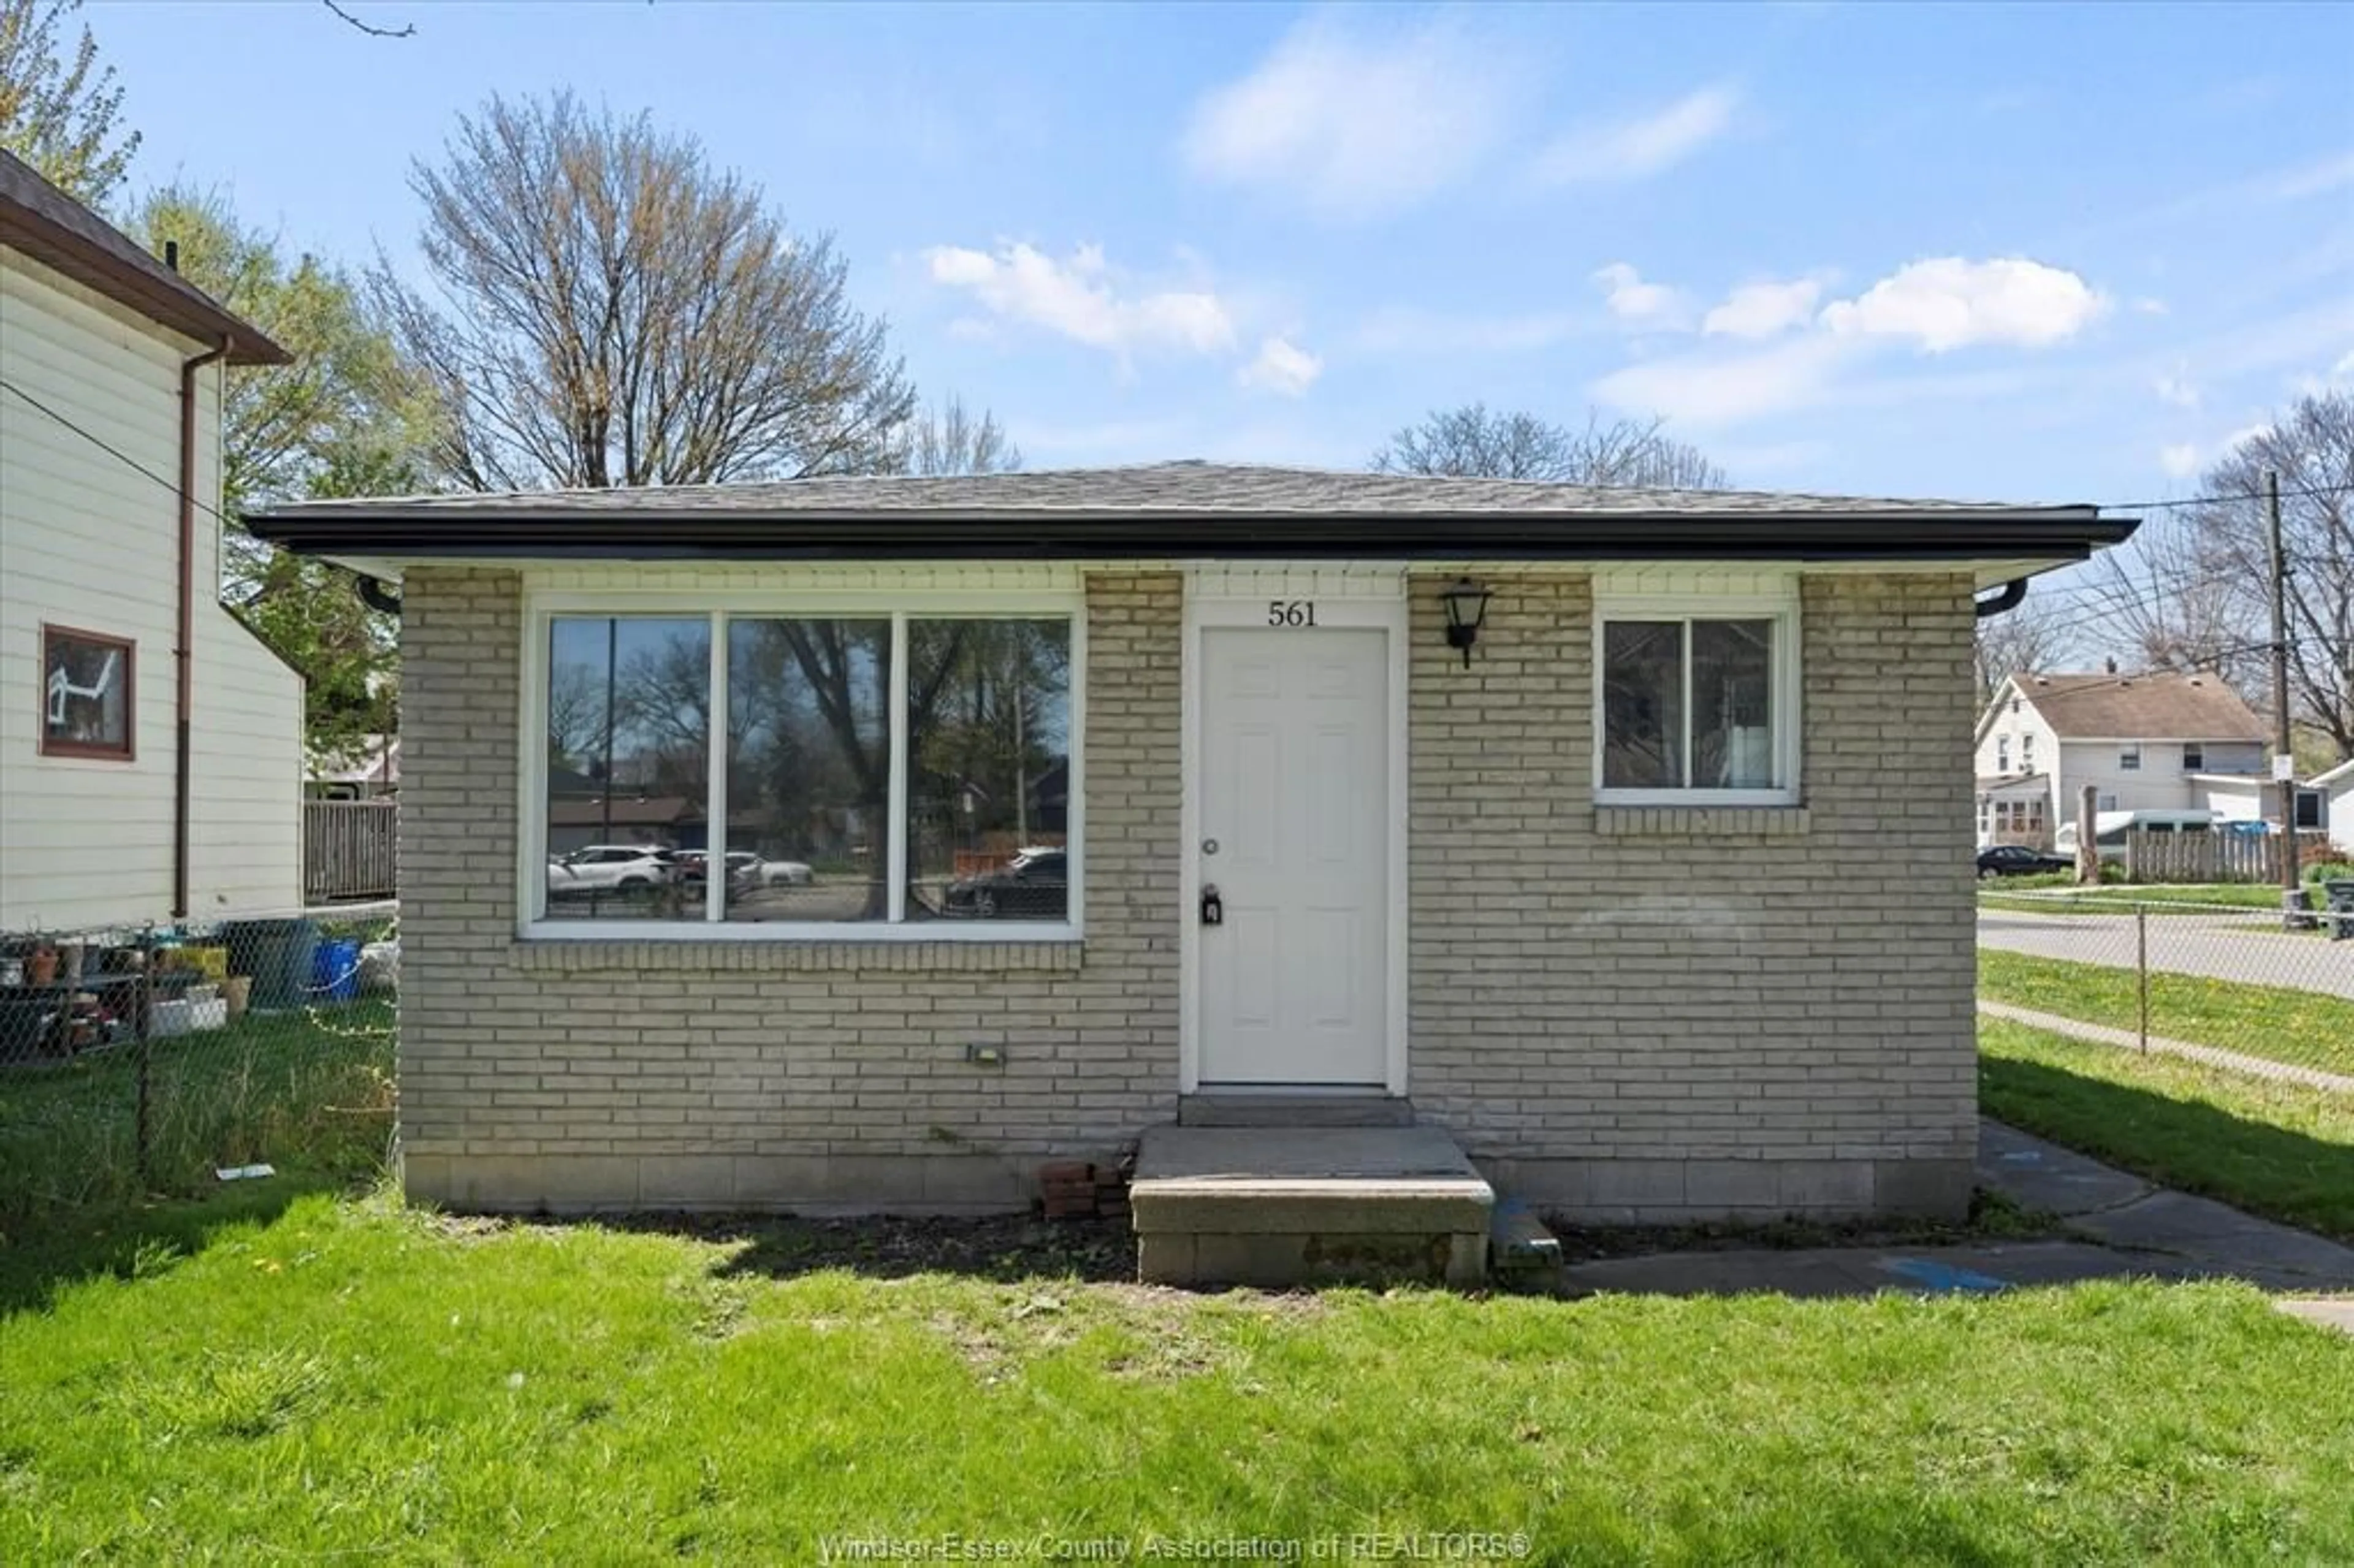 Home with brick exterior material for 561 Chippawa St, Windsor Ontario N9C 2W2